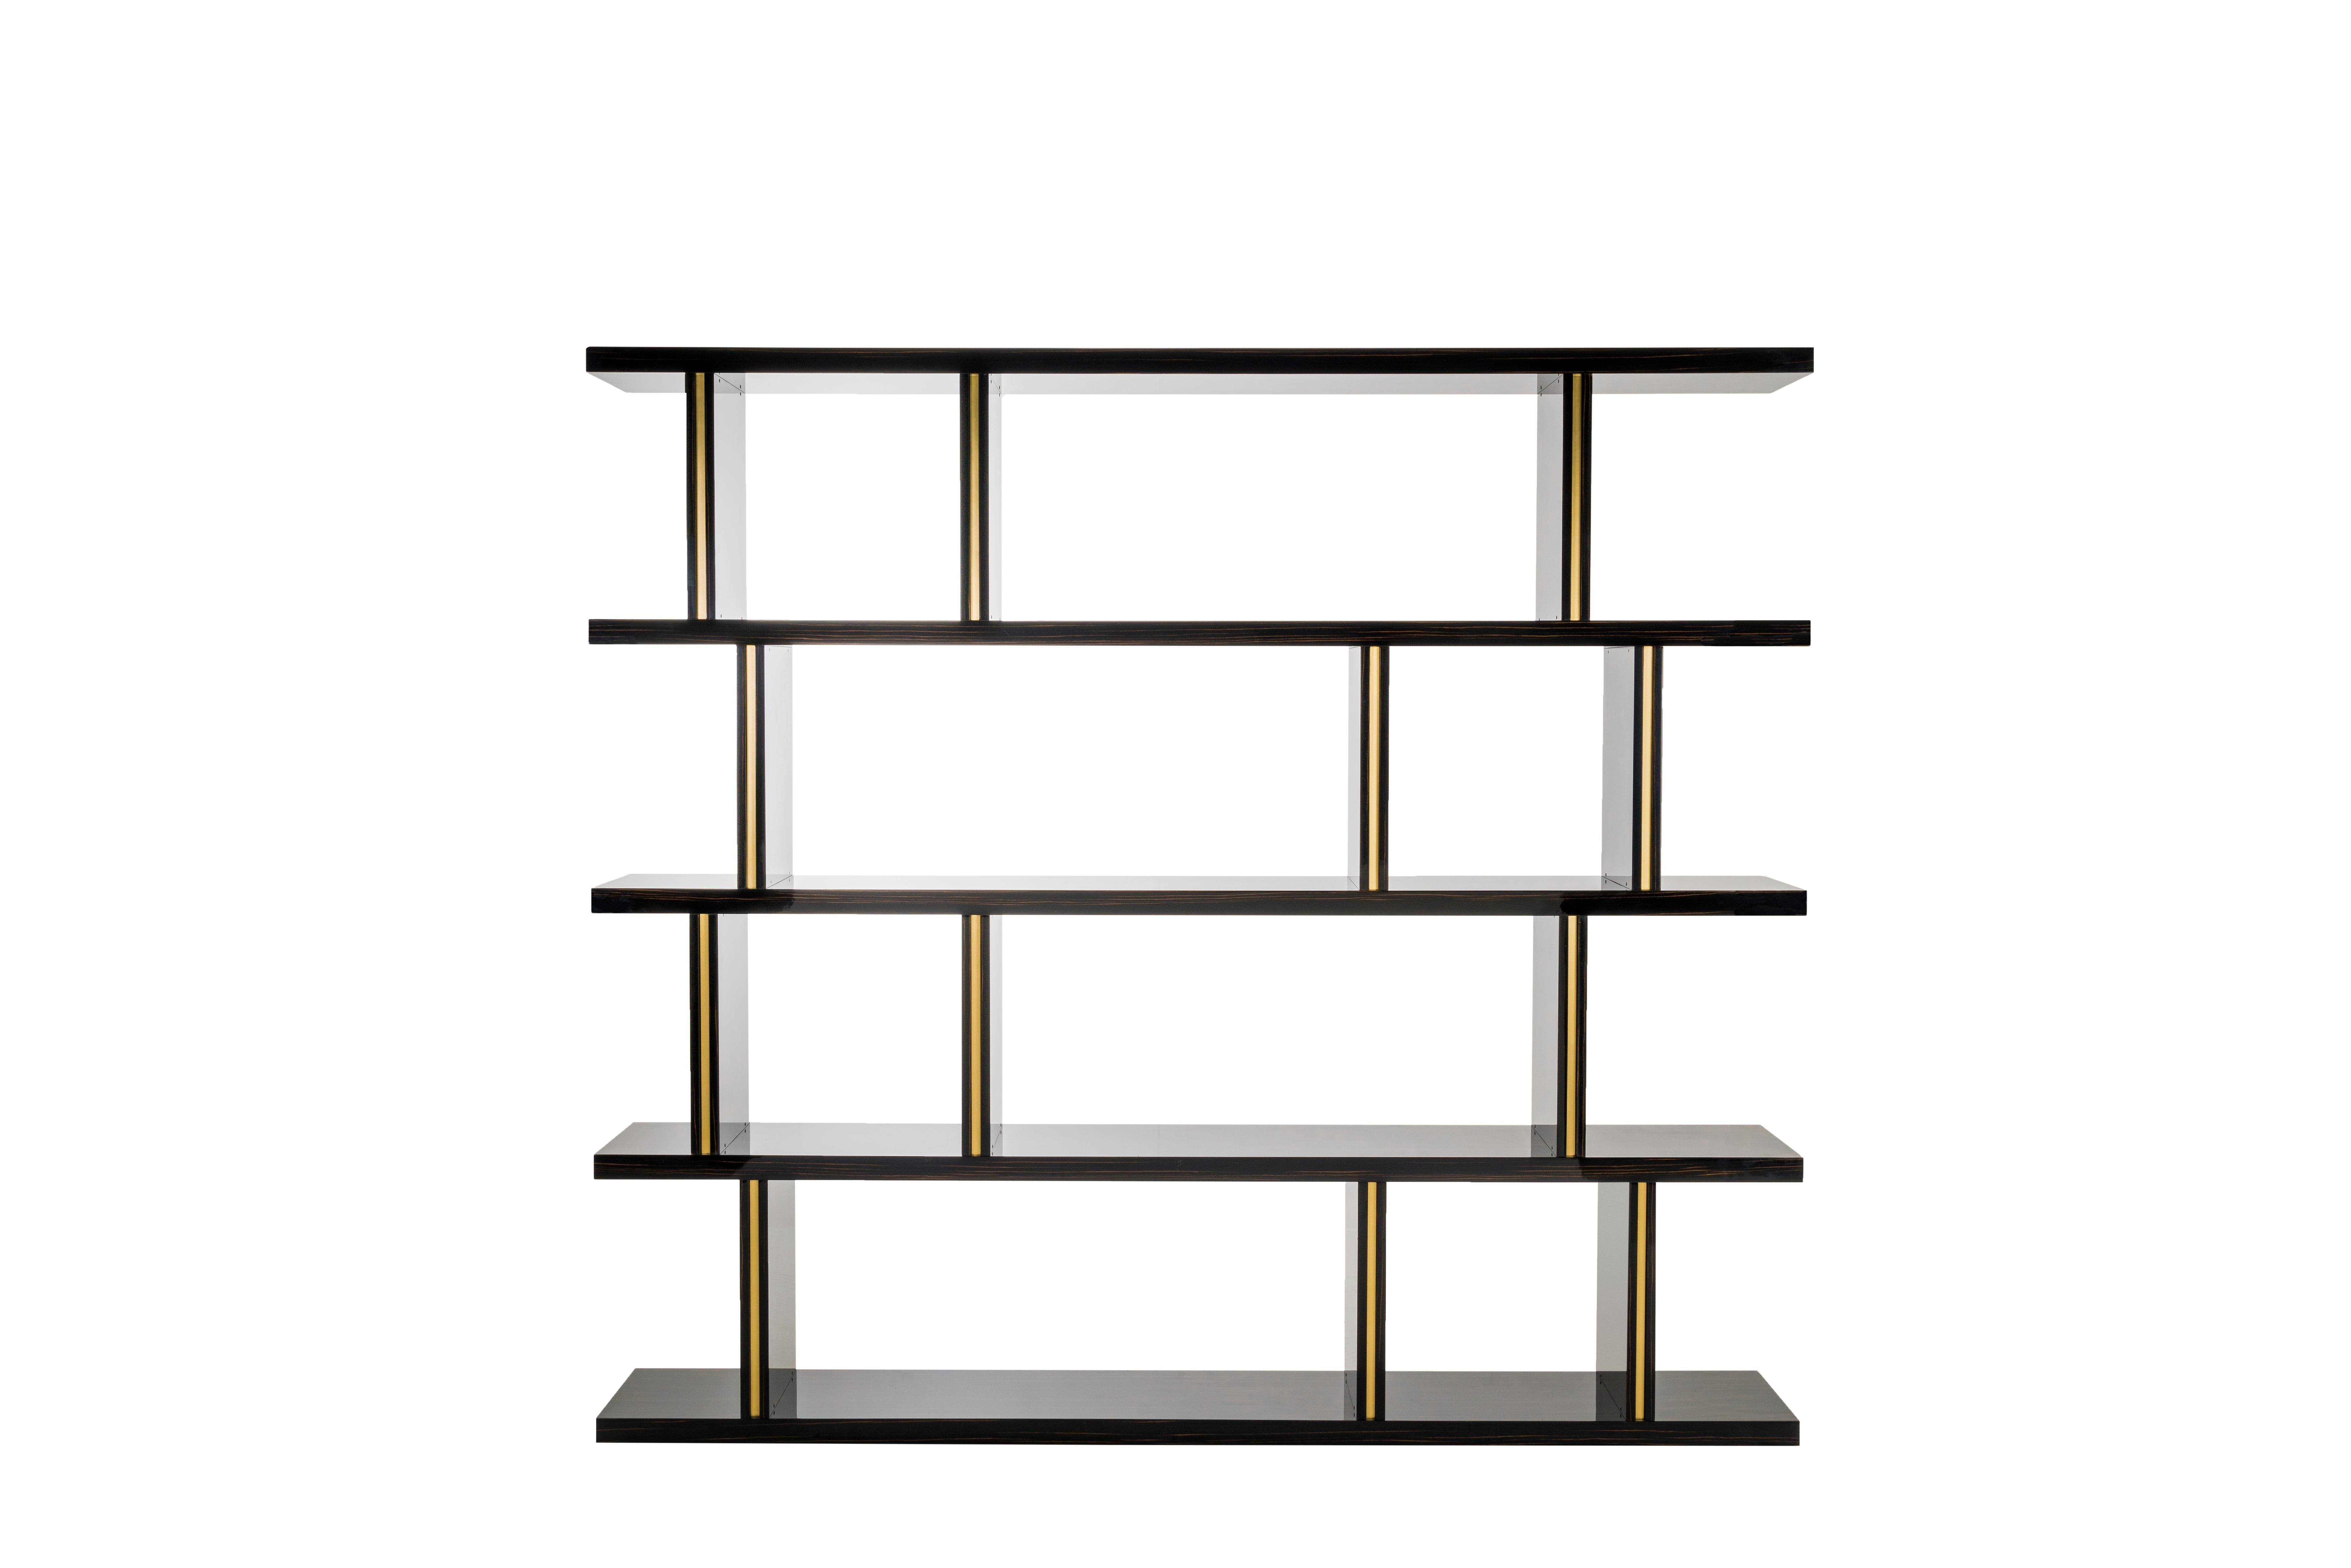 The versatile Nobre bookcase can be used on the wall or as a room separator. Made of solid wood with metal details in Stainless Steel or Antique Brass. Nobre is available in any lacquer or veneered wood colour.‎

Primary image: Shown in glossy Ebony